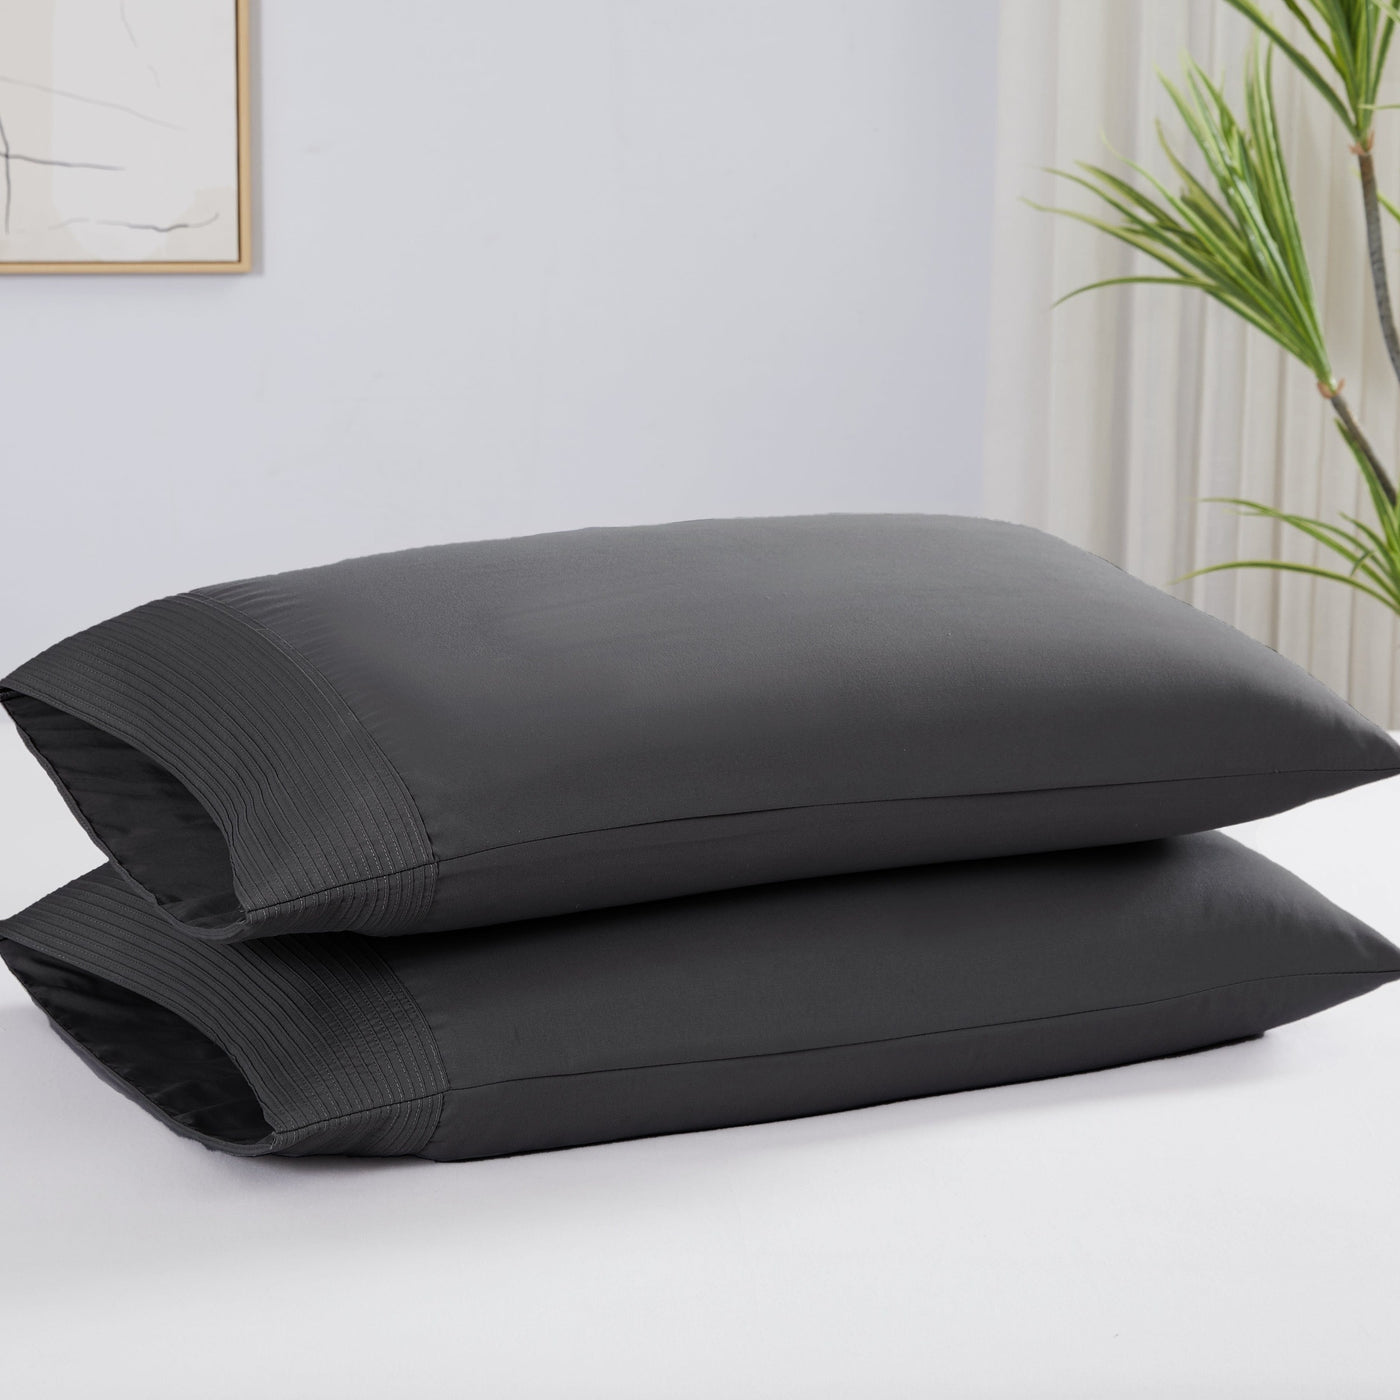 Two Vilano Pleated Pillow Cases in Slate Stack Together#color_vilano-slate